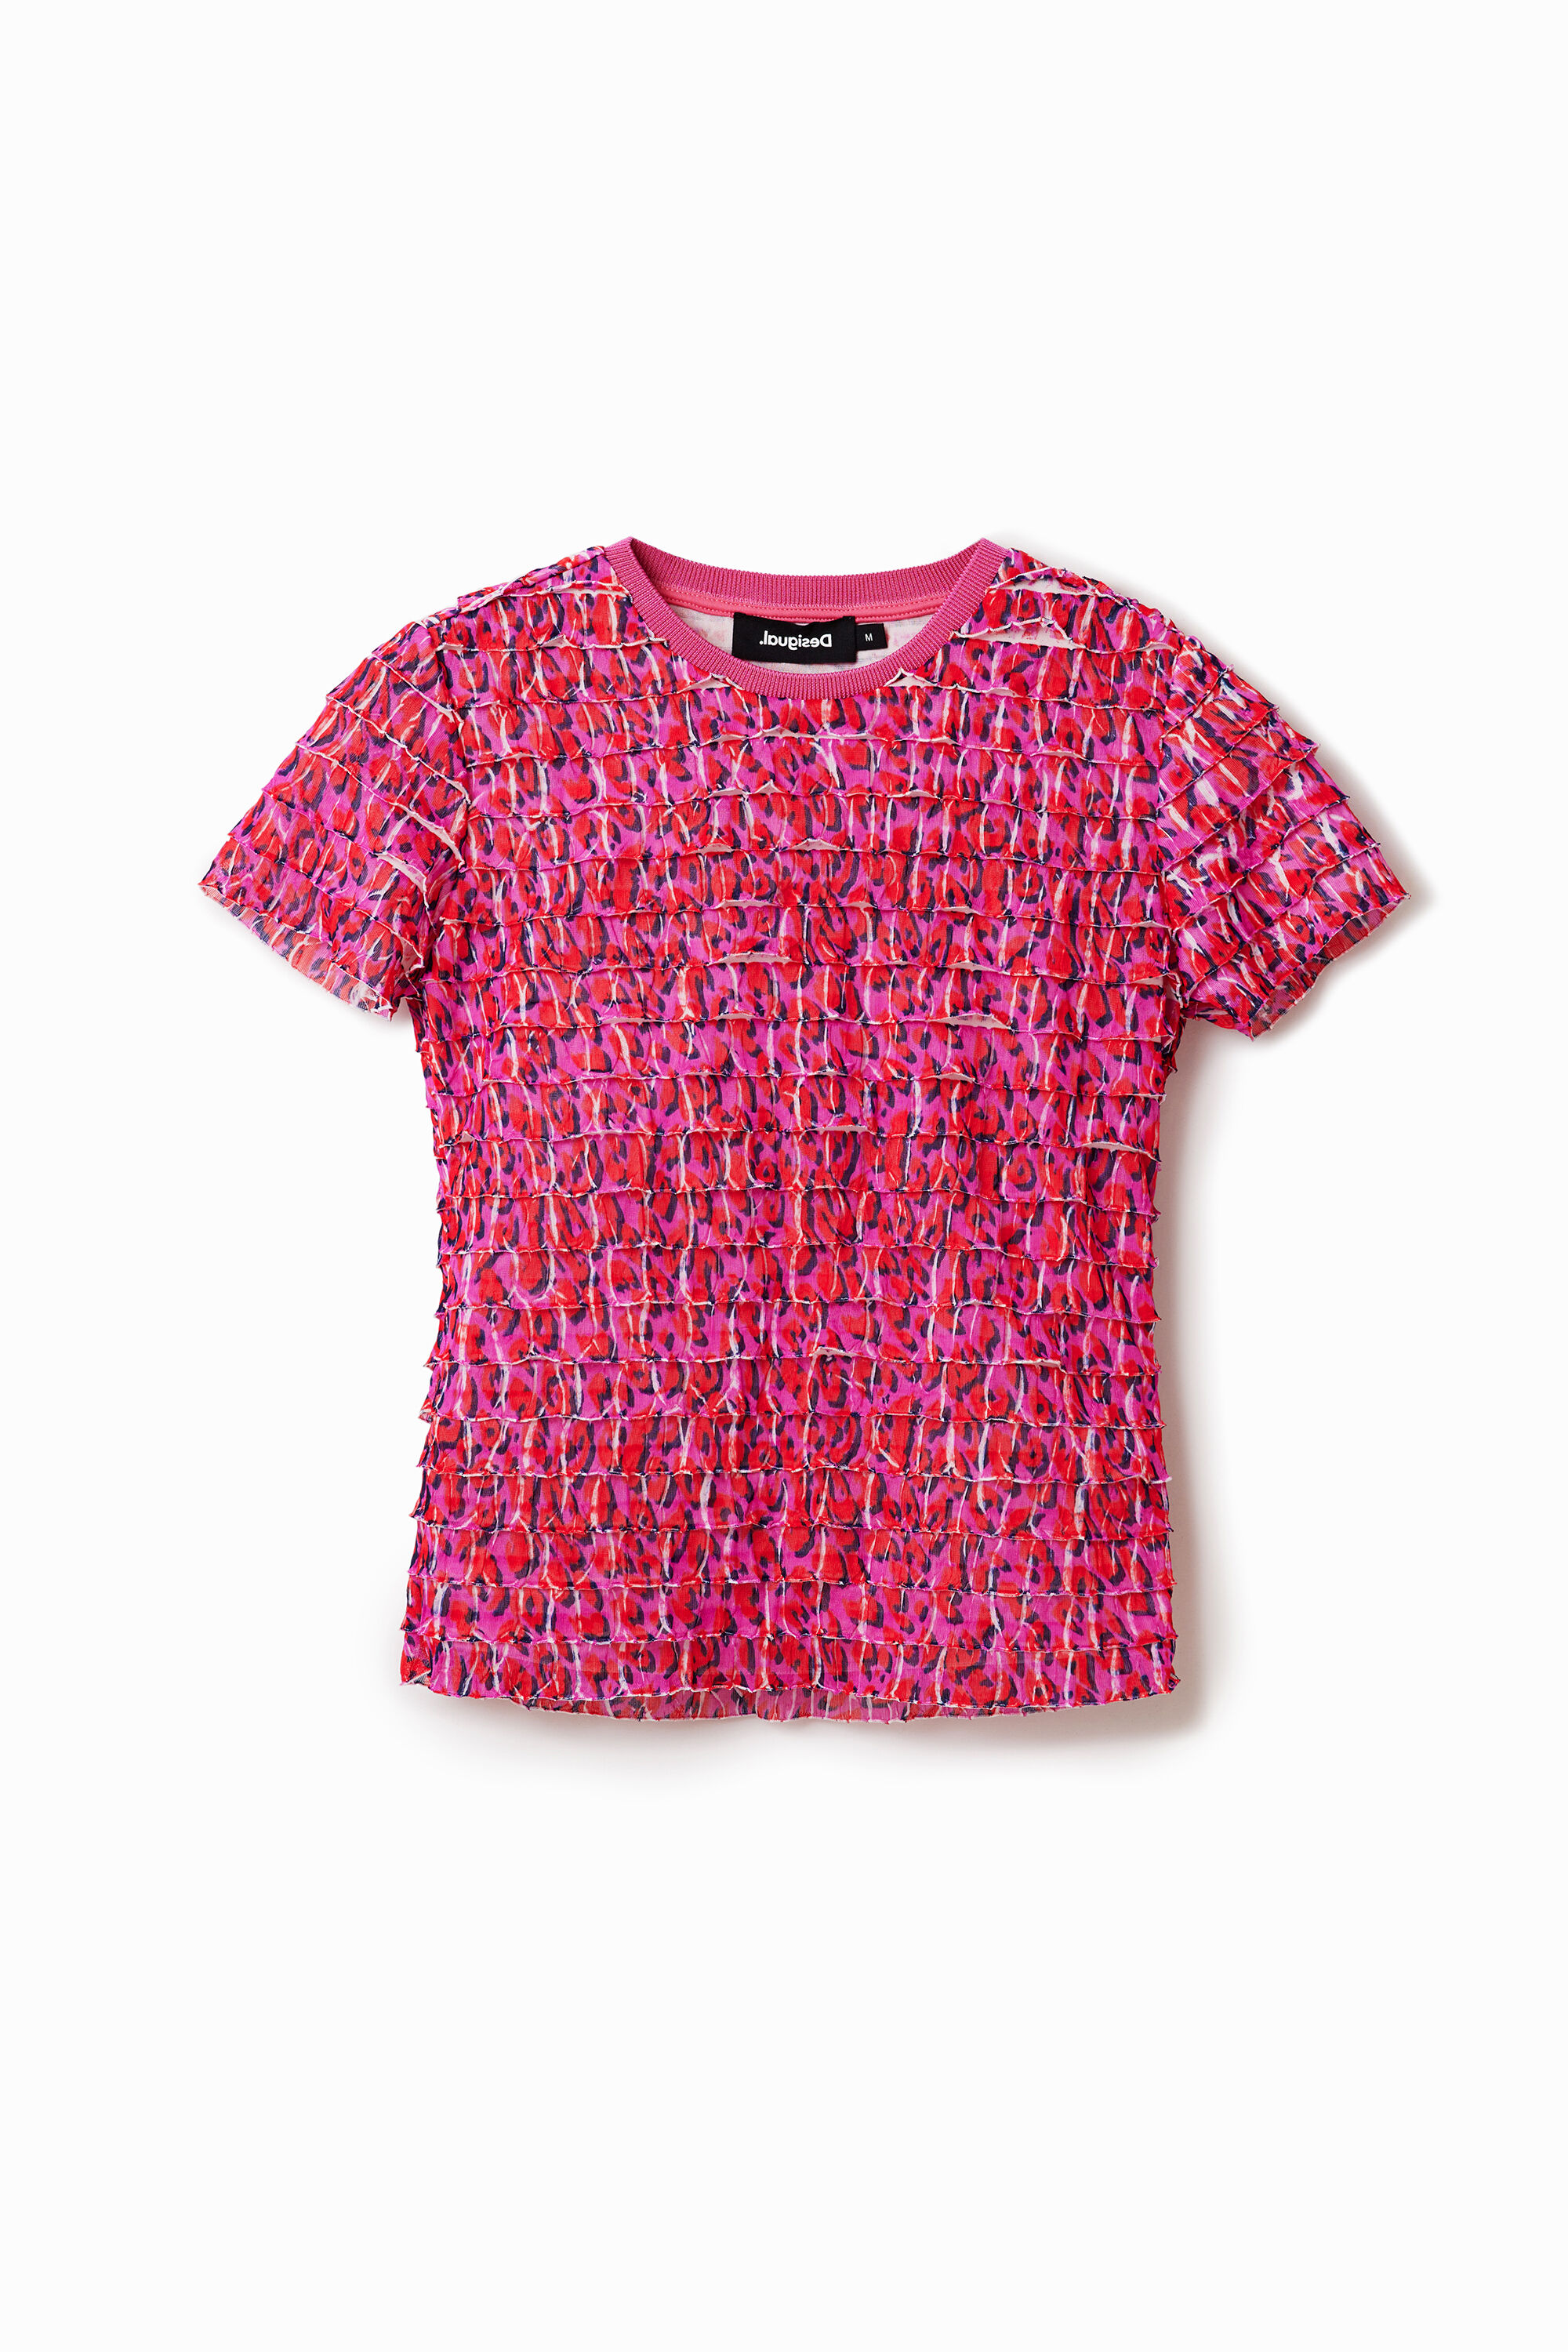 Cropped animal print T-shirt - RED - S